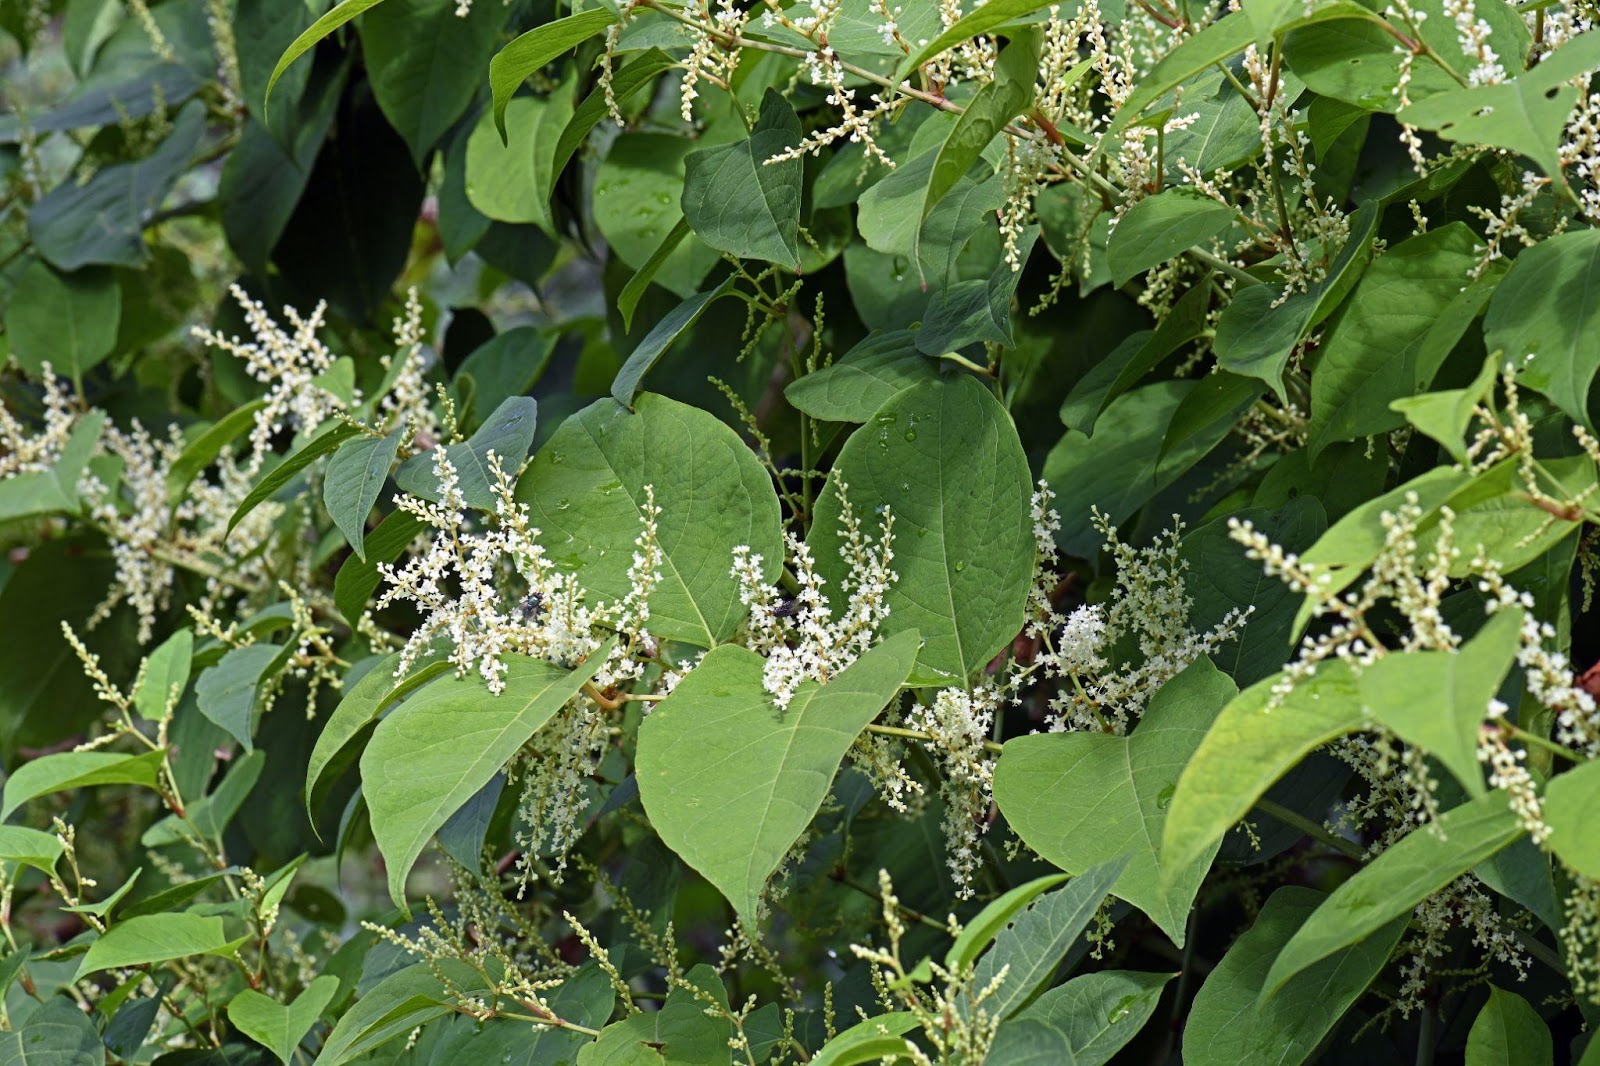 Spotted Japanese Knotweed? Here’s What You Need to Do - Gardening